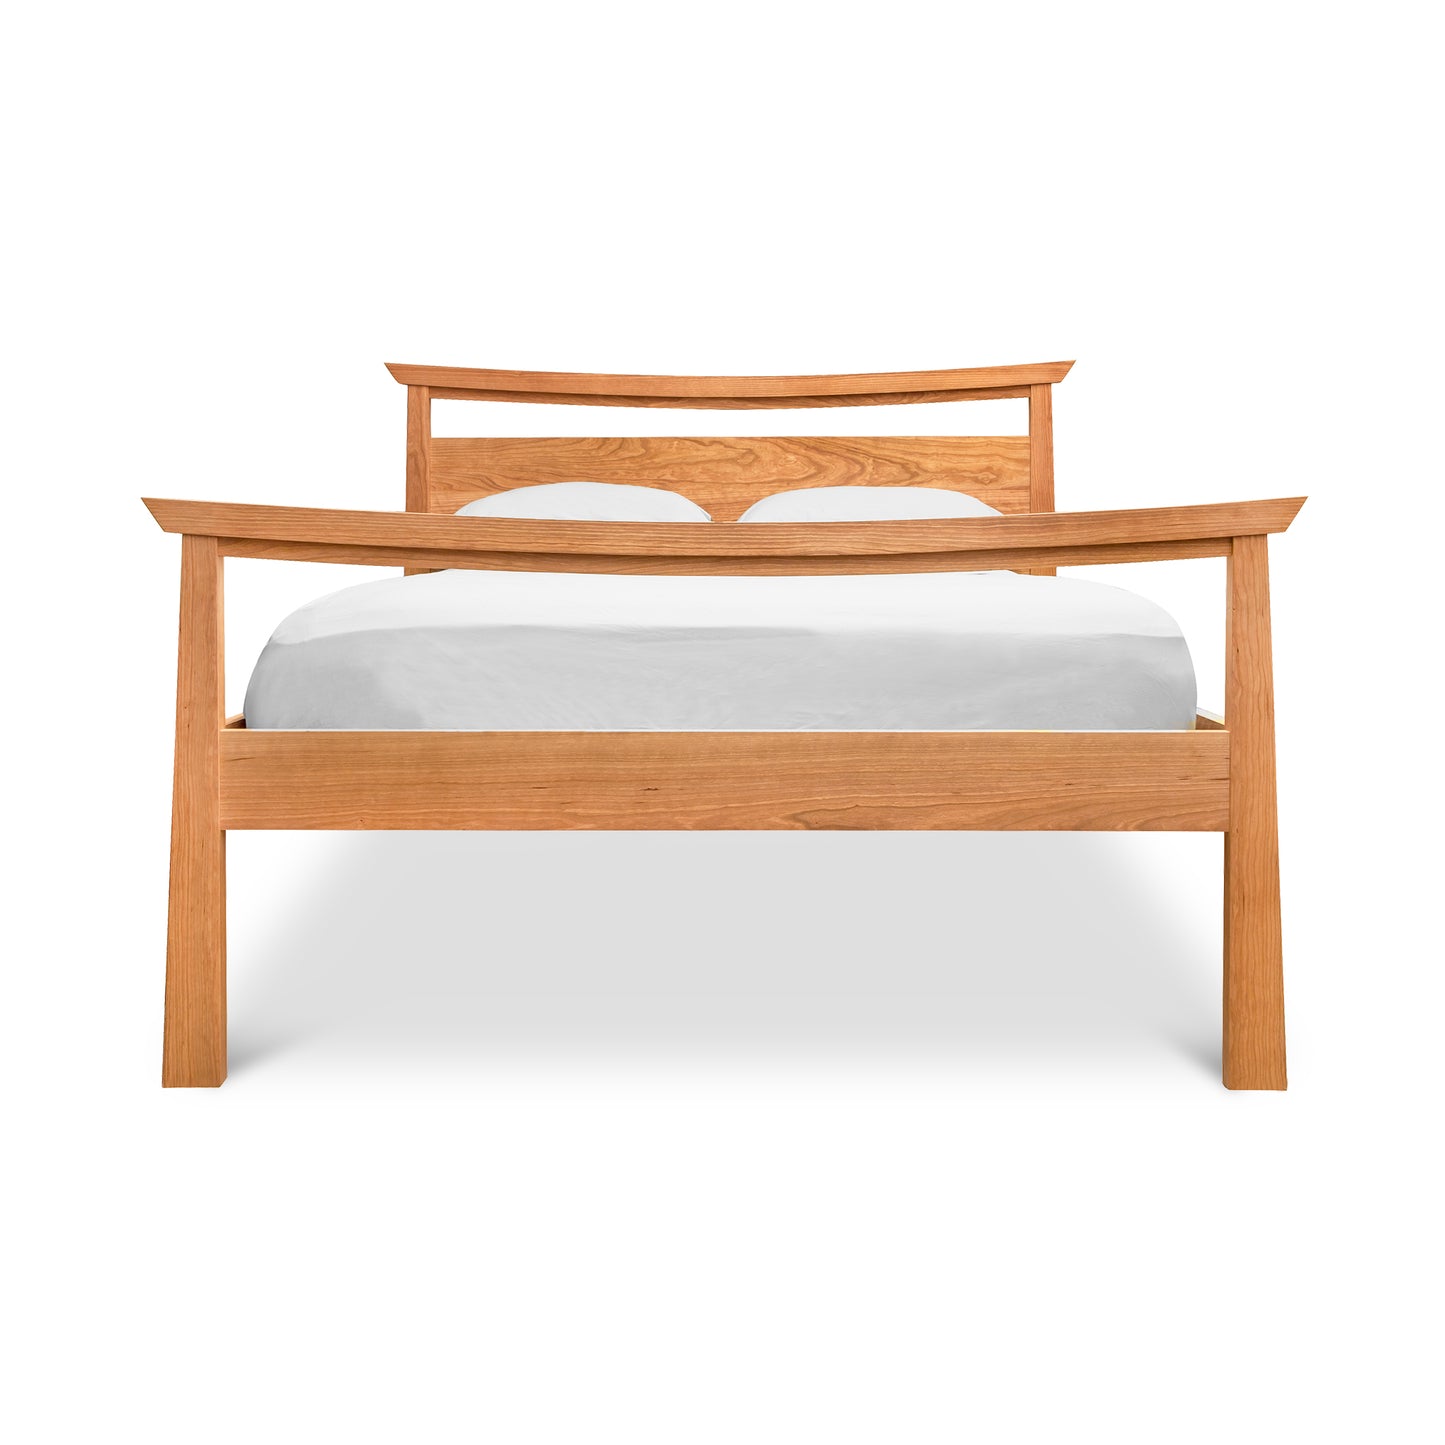 A modern bench made from natural cherry hardwood with a curved backrest and a white cushion, isolated on a white background, the Cherry Moon Pagoda Bed by Maple Corner Woodworks.